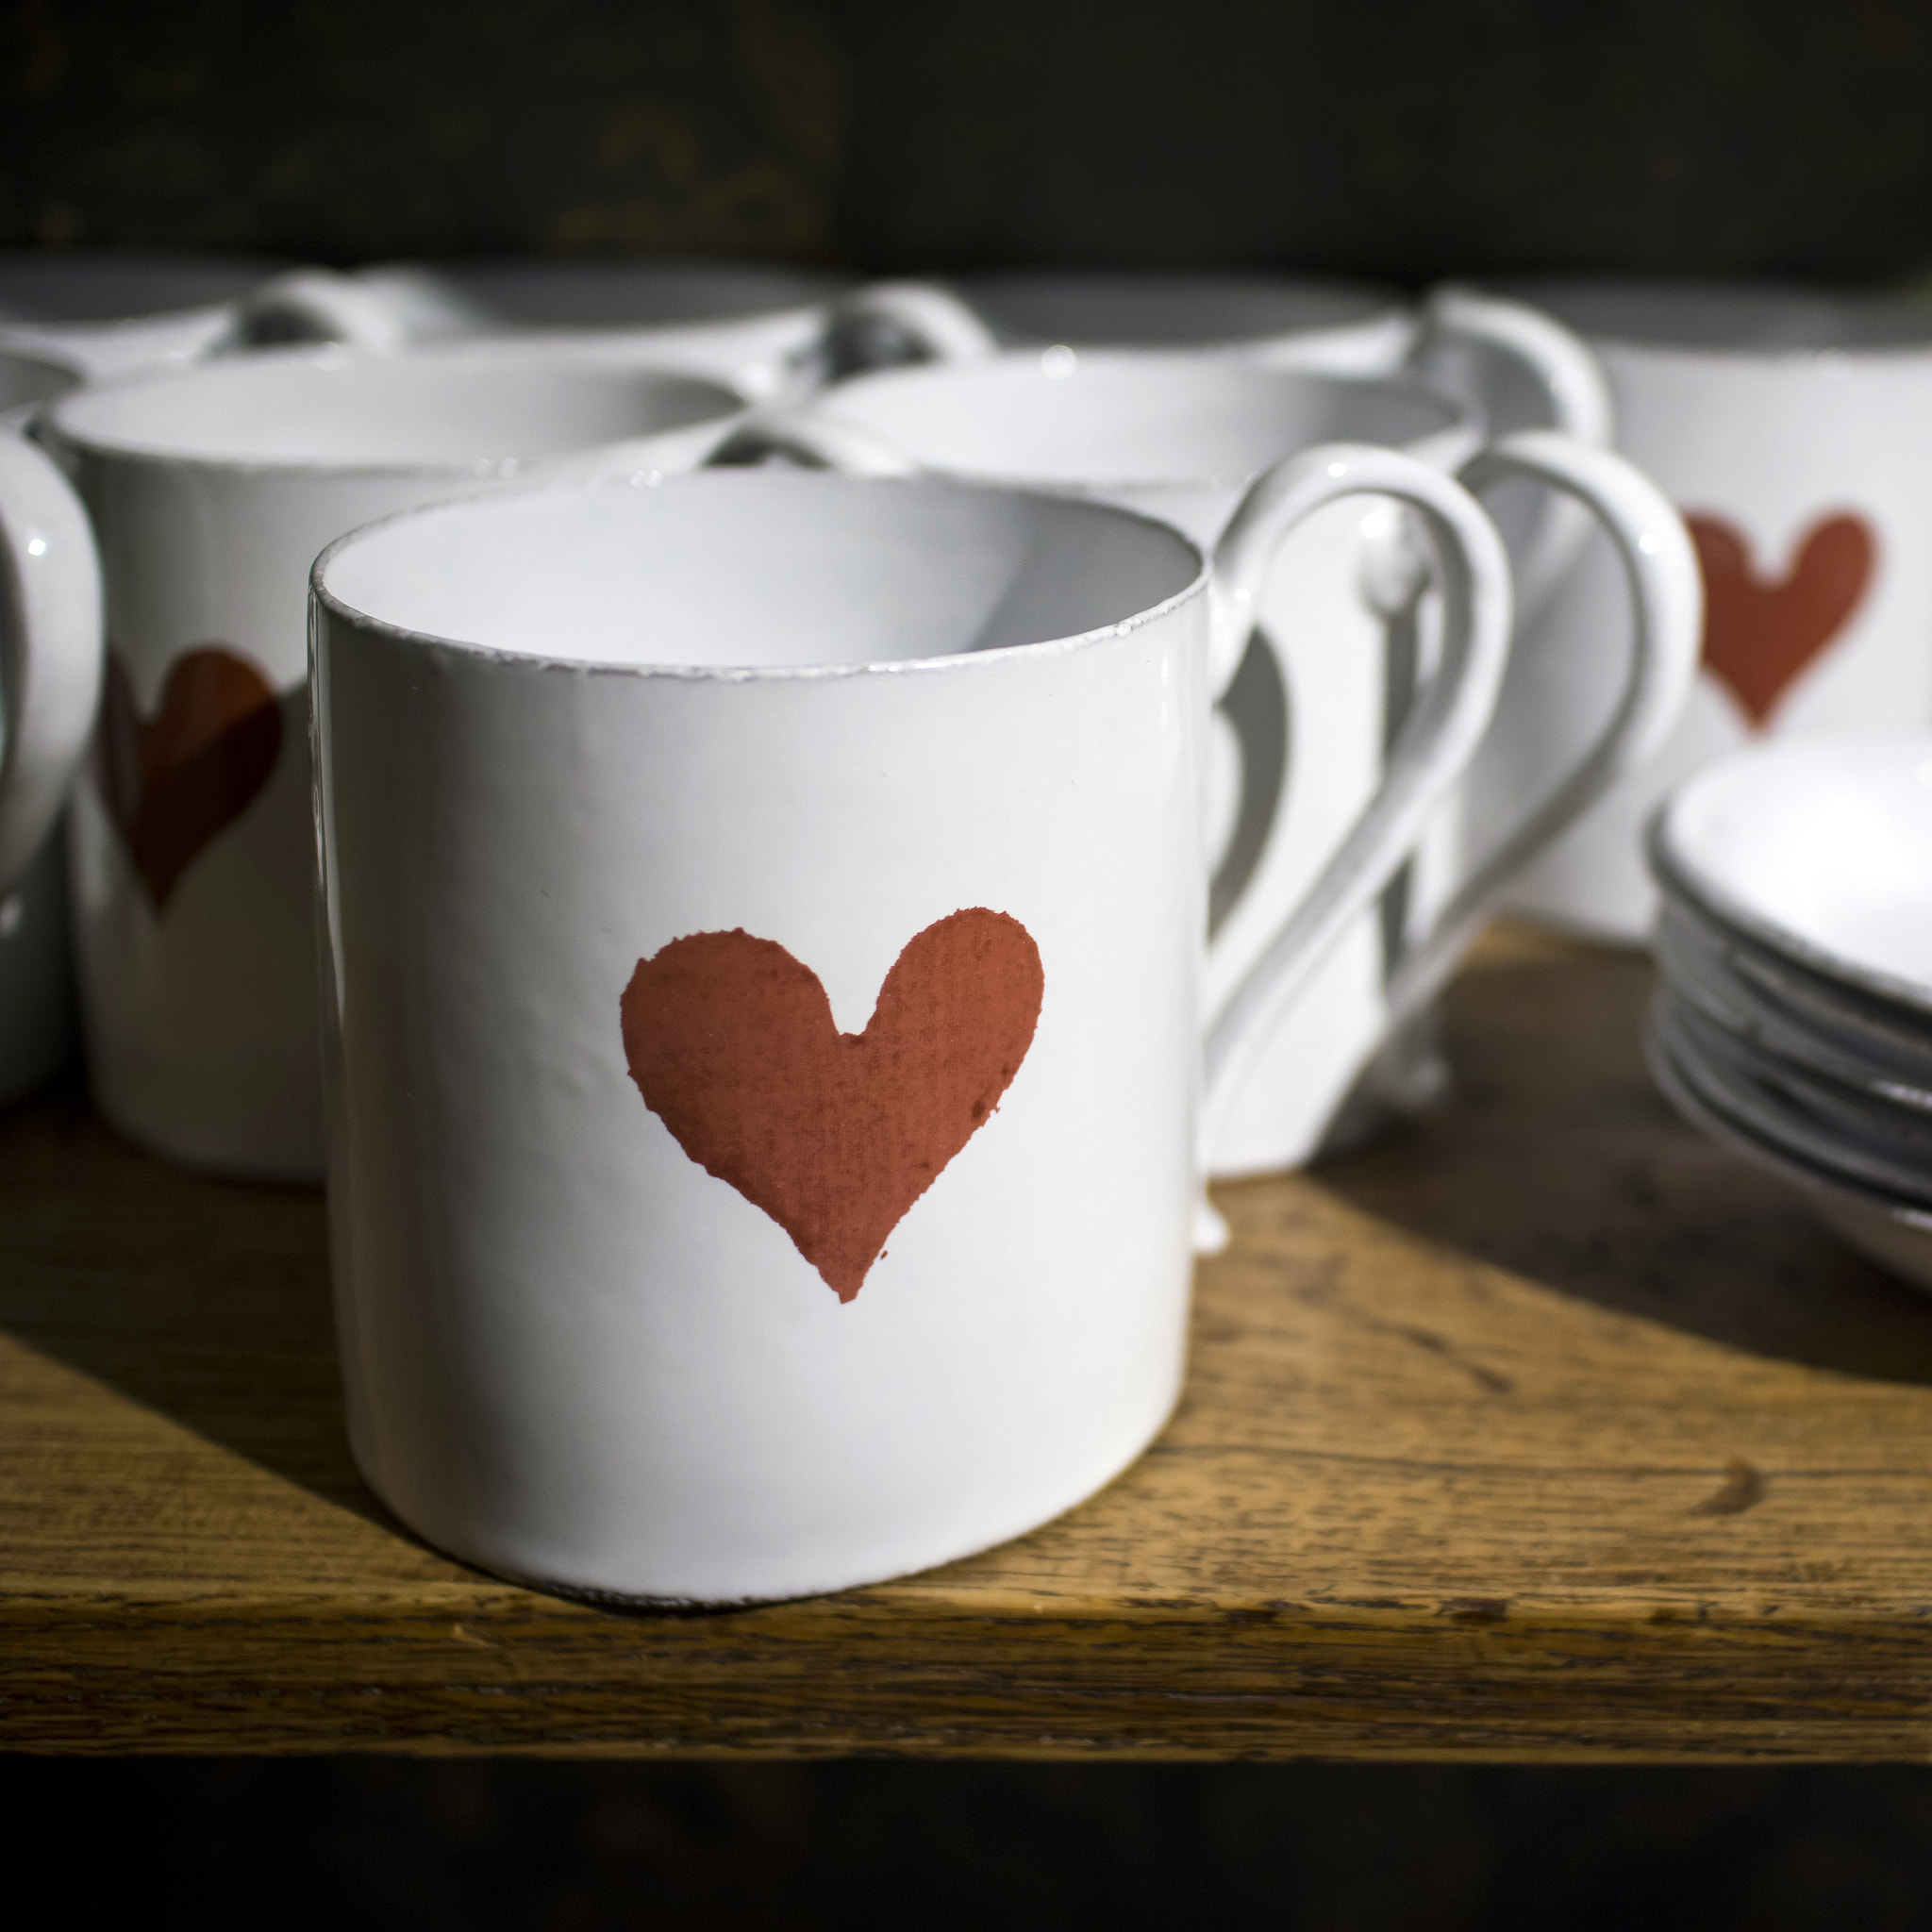 White porcelain mugs and saucers with red heart print